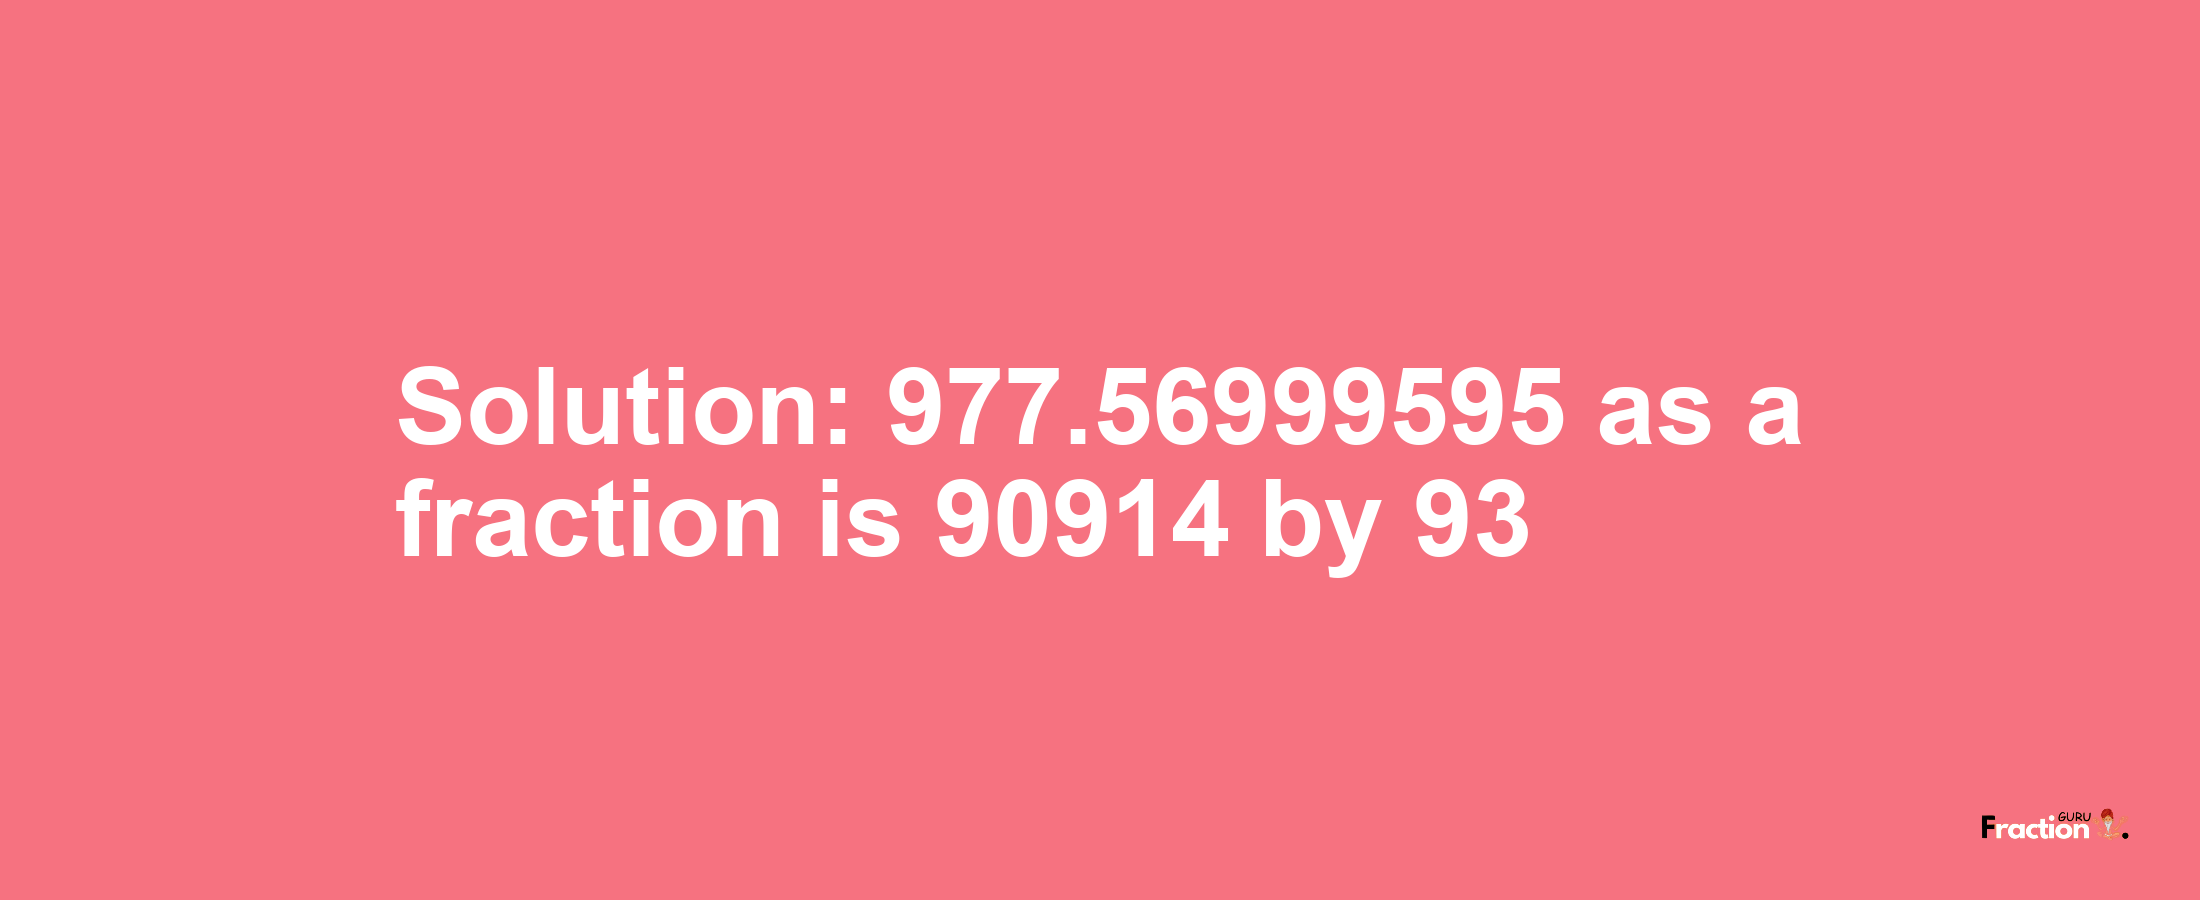 Solution:977.56999595 as a fraction is 90914/93